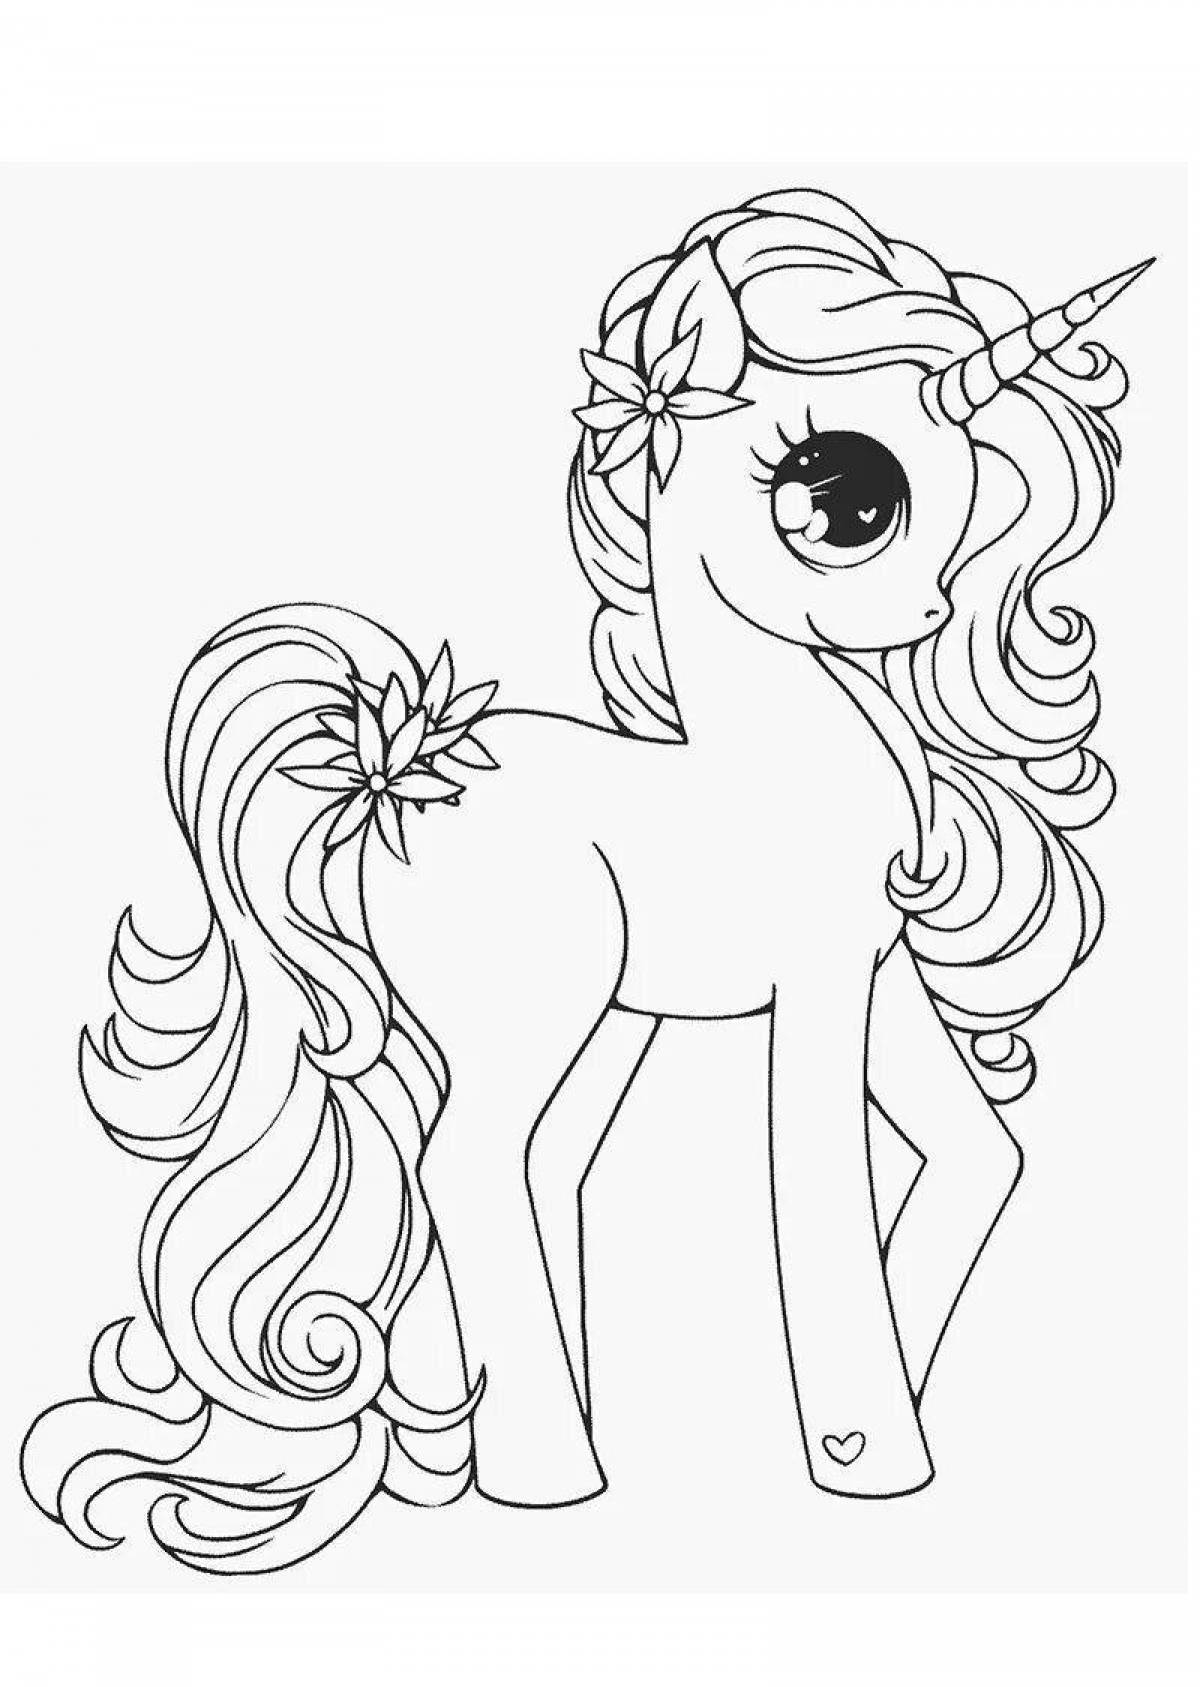 Awesome coloring book for girls with unicorn print